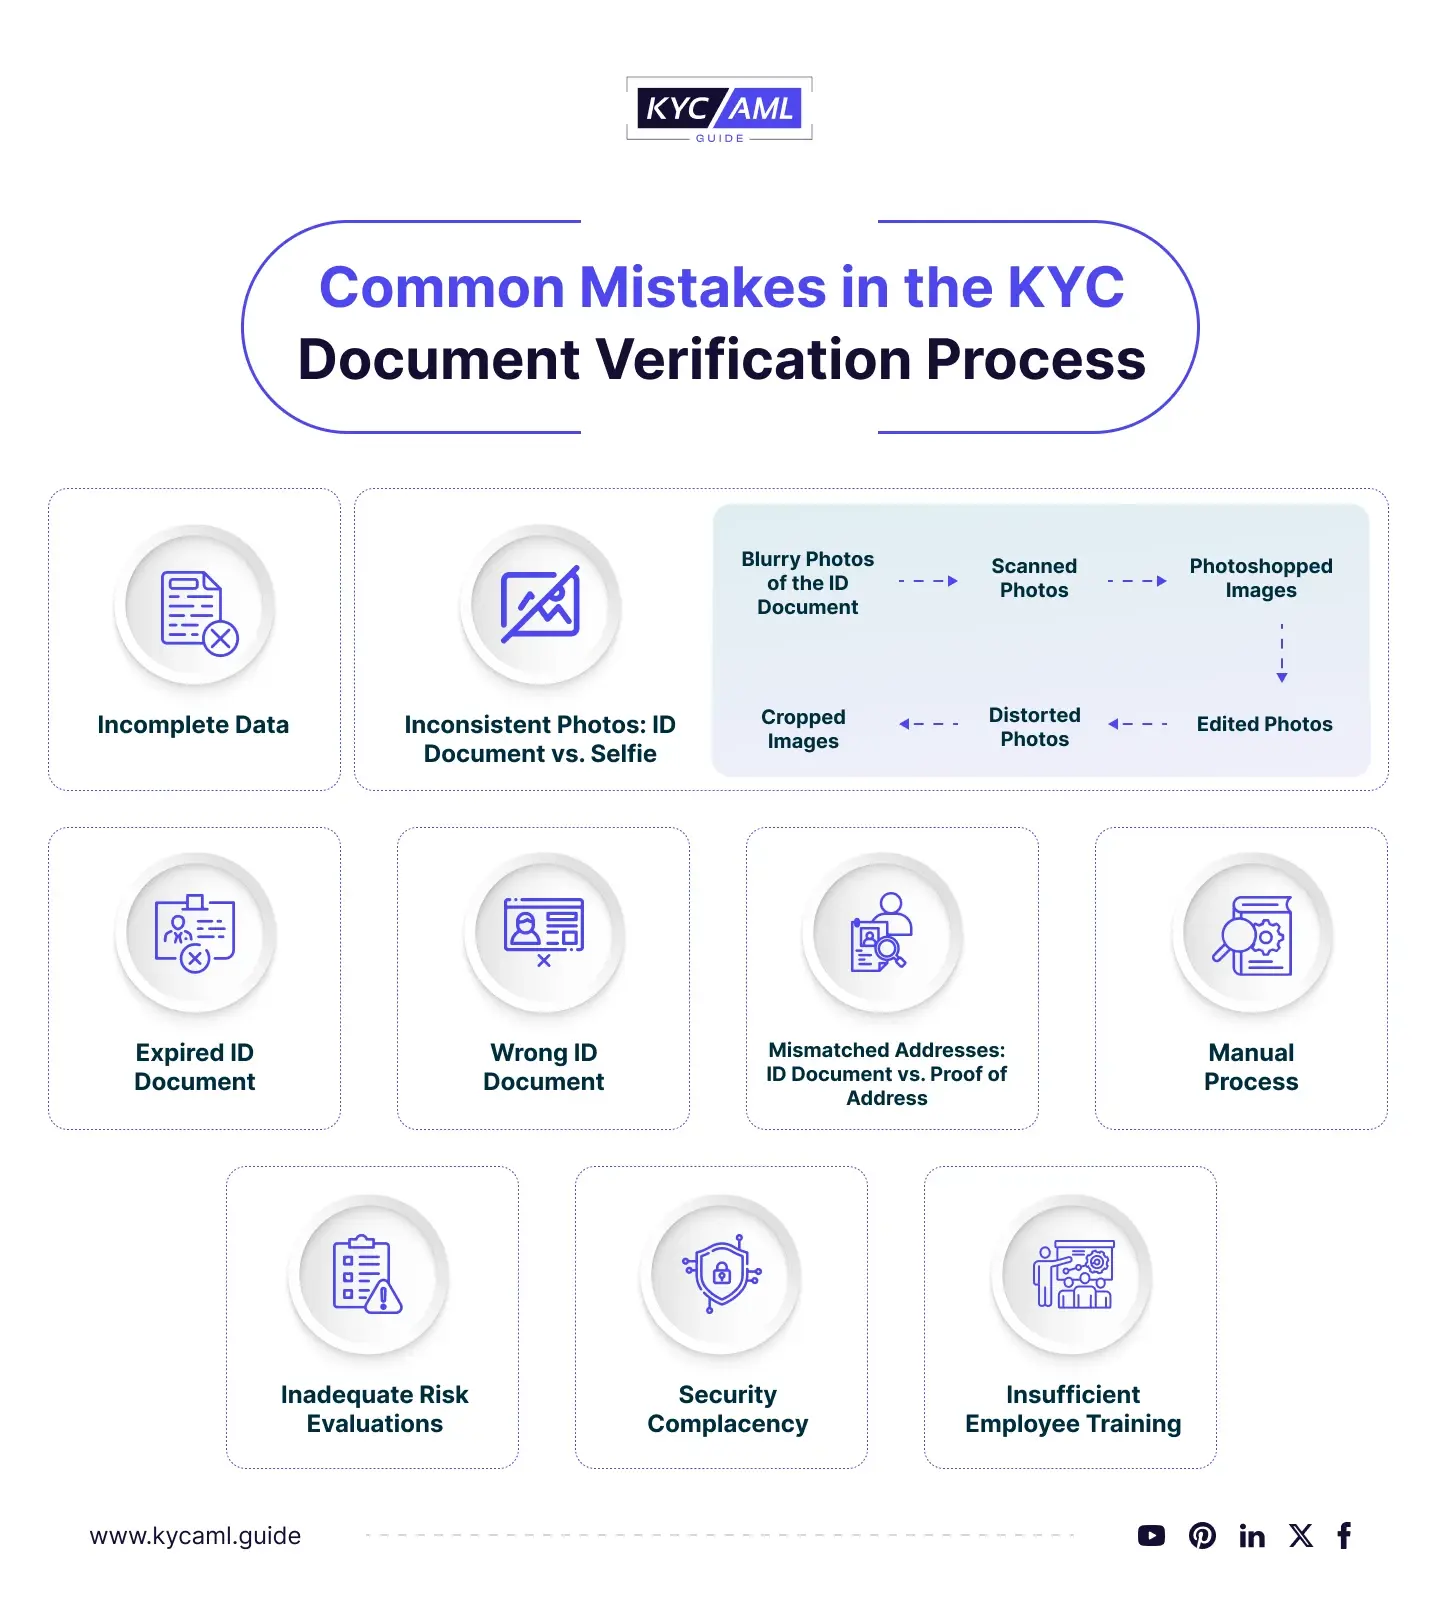 Common Mistakes in the KYC Document Verification Process